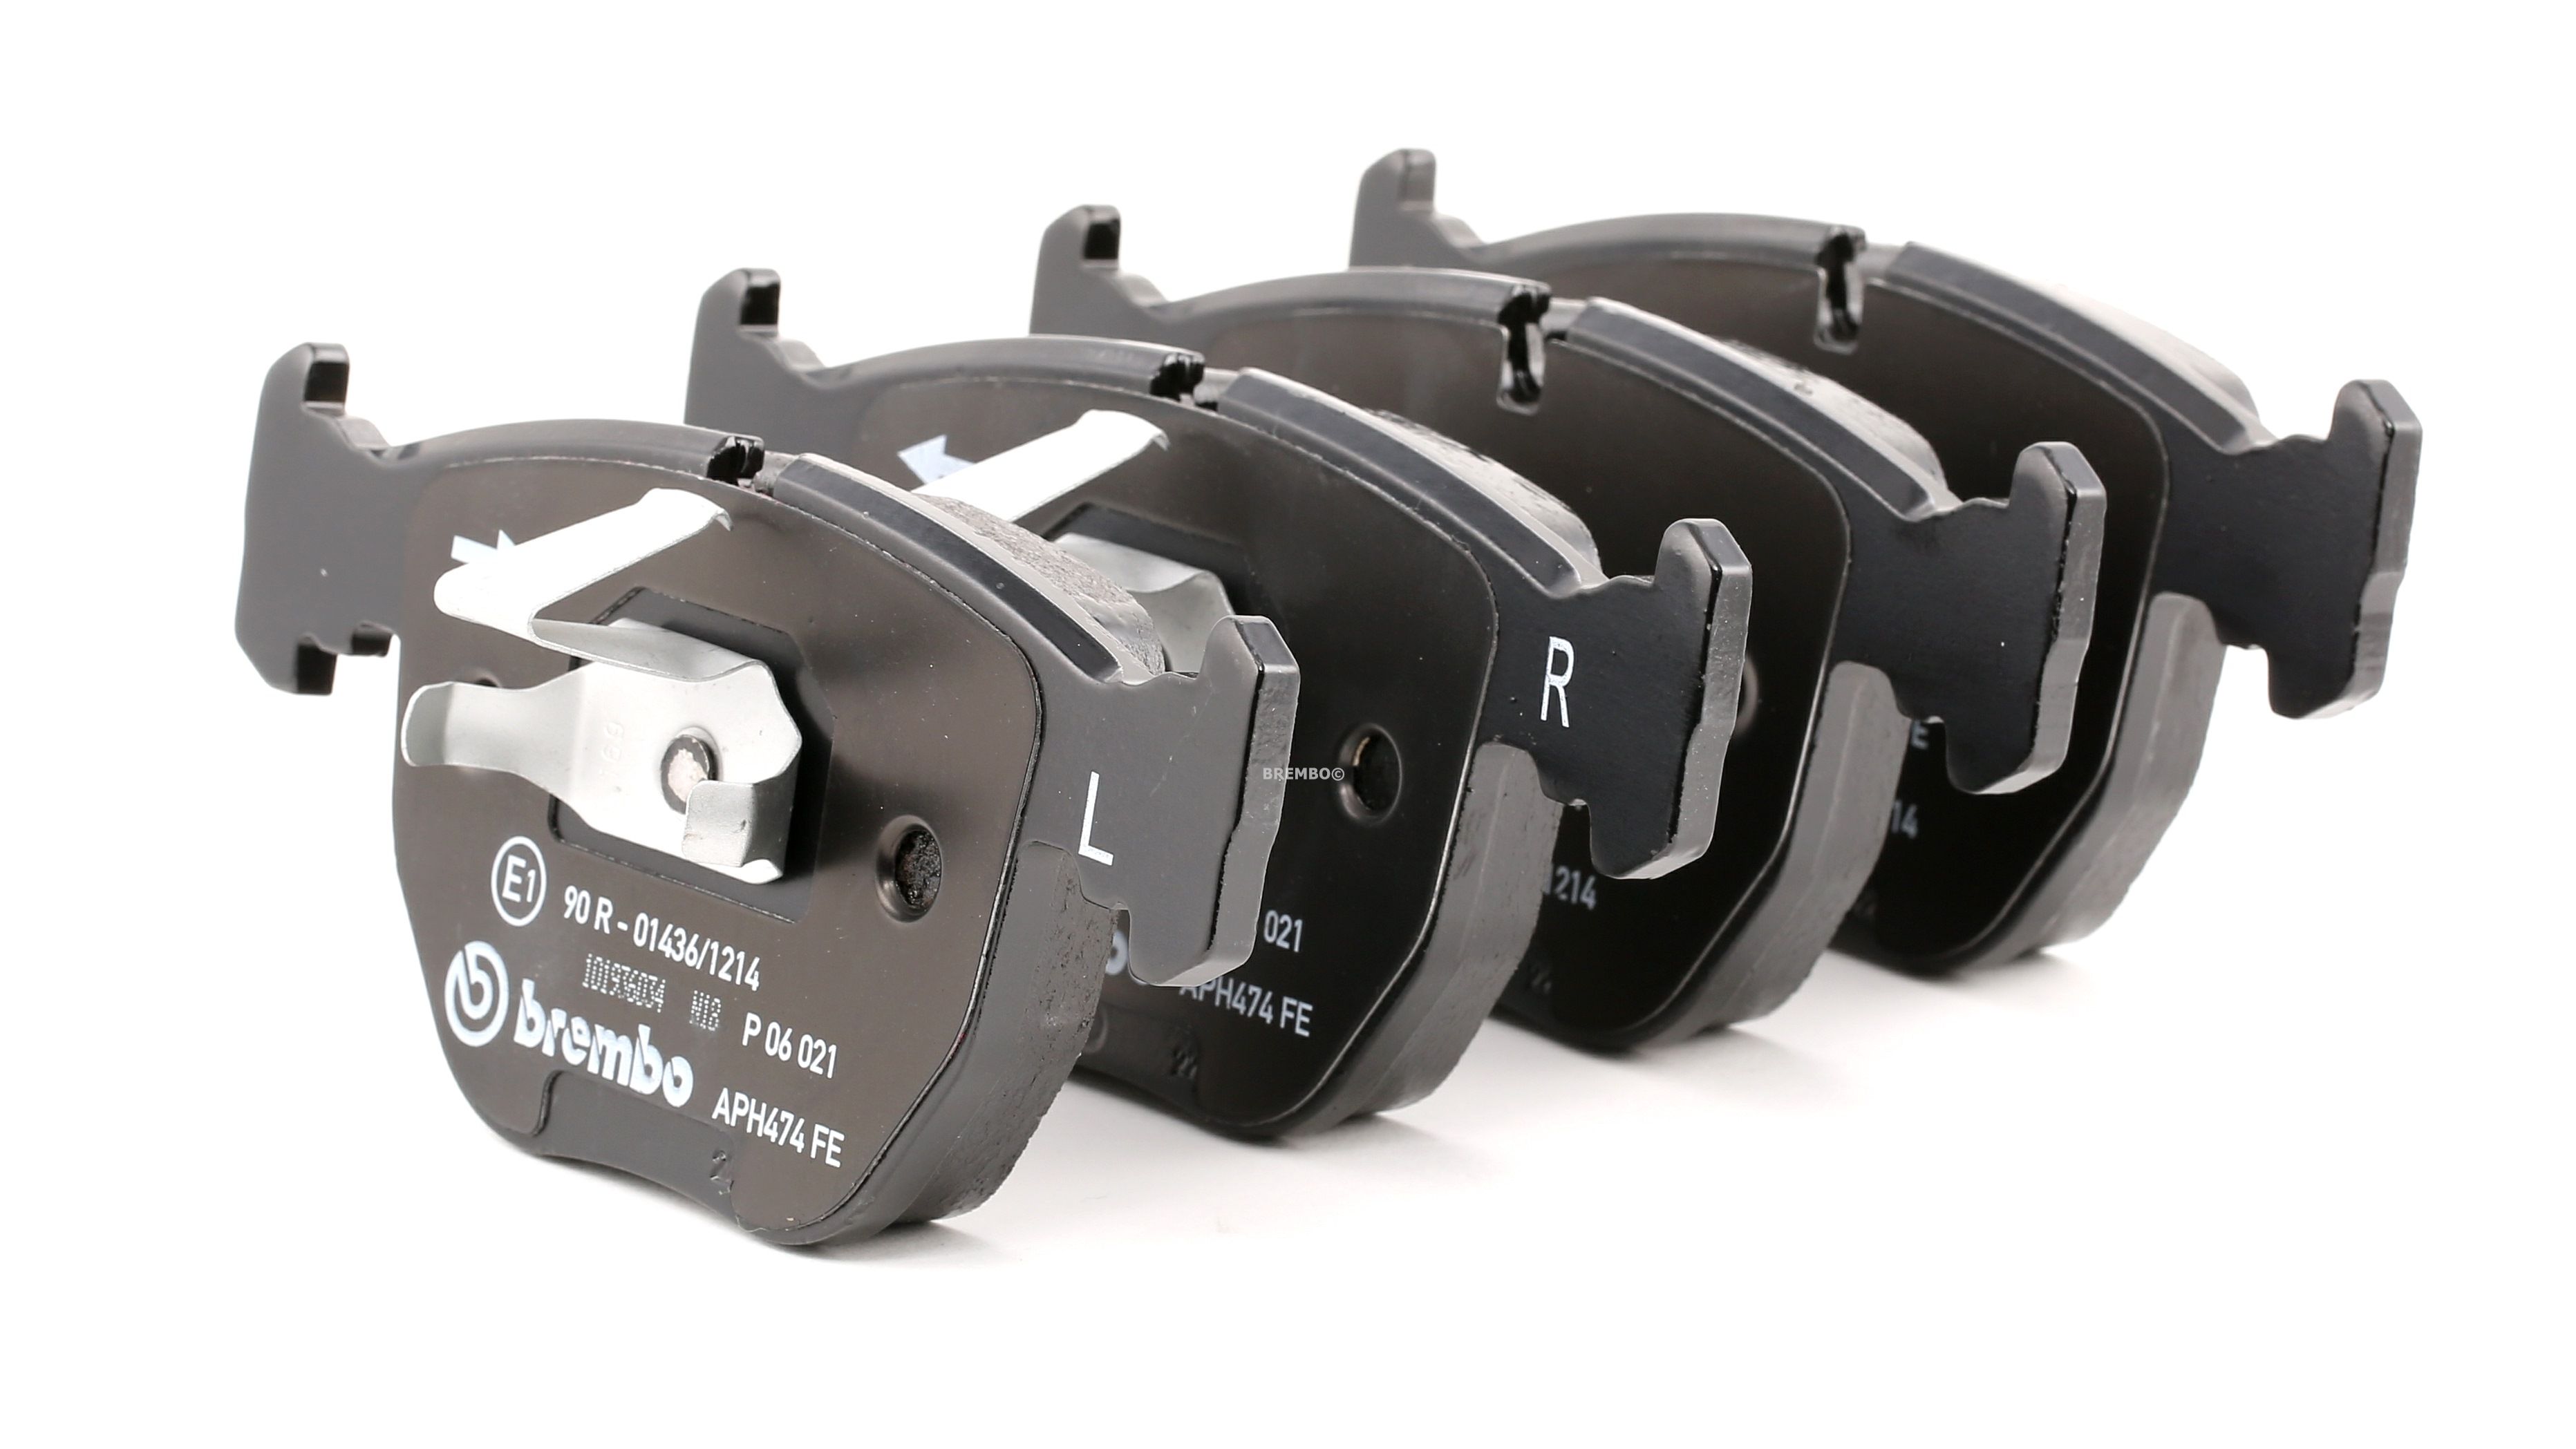 BREMBO P 06 021 Brake pad set prepared for wear indicator, with piston clip, without accessories